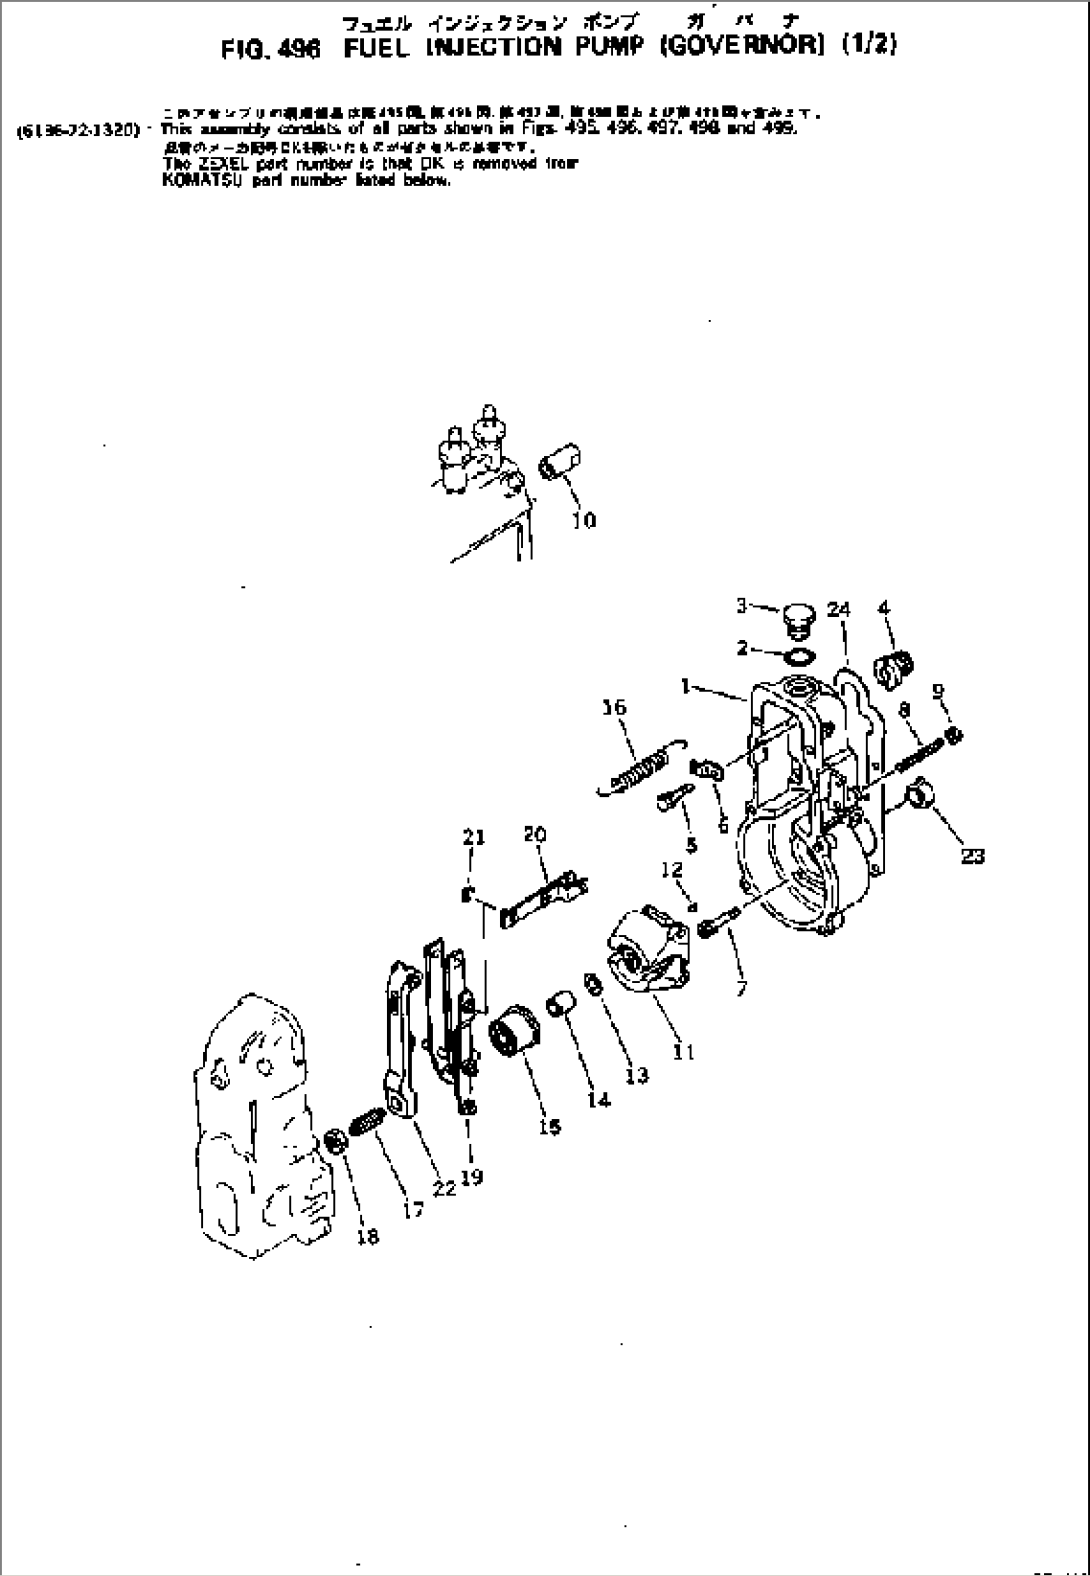 FUEL INJECTION PUMP (GOVERNOR) (1/2)